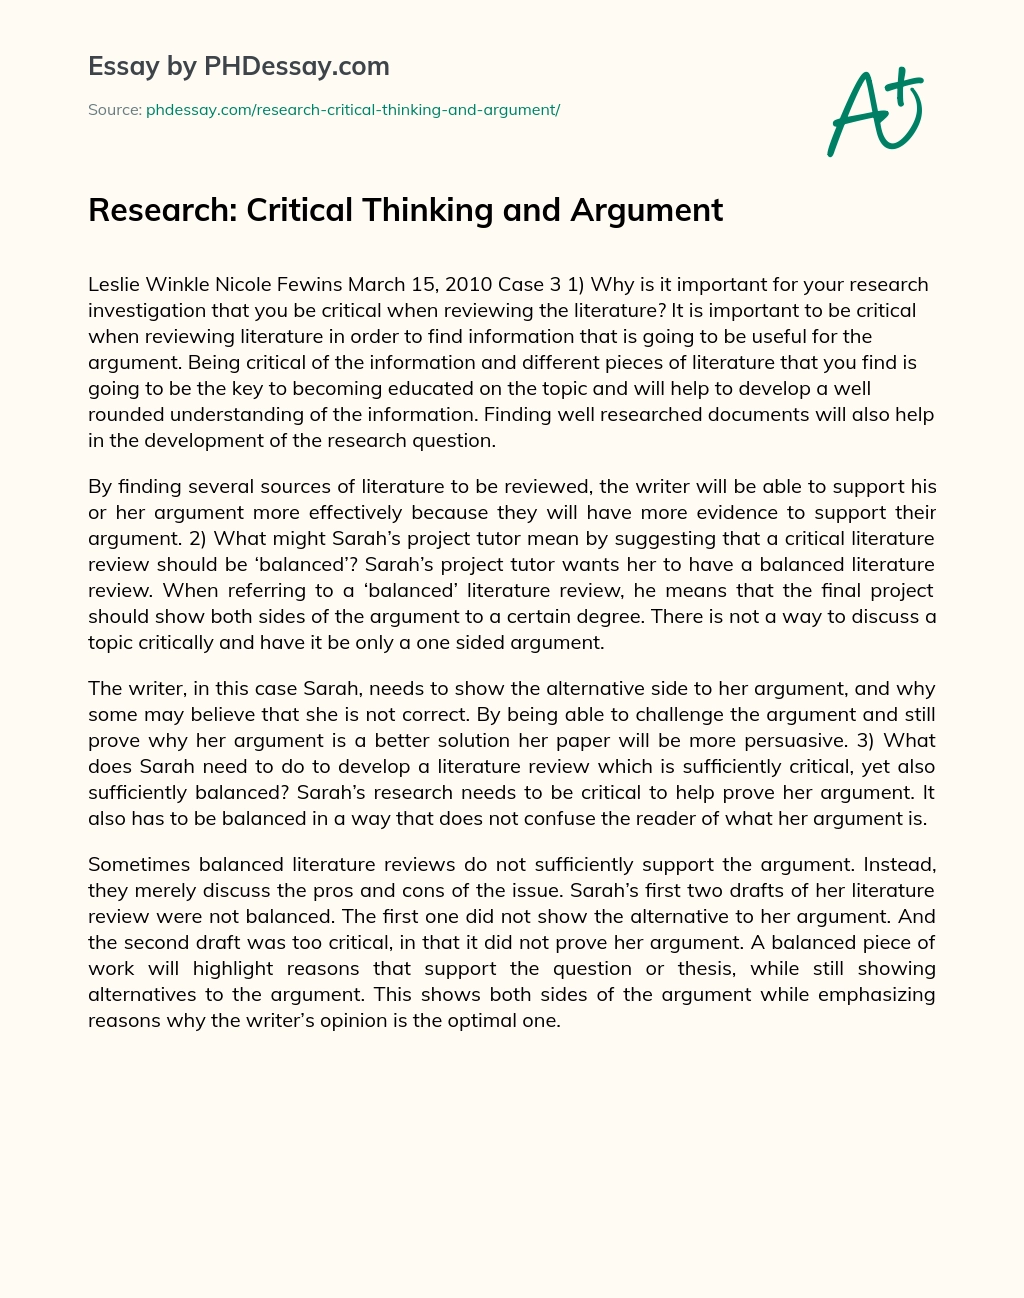 Research: Critical Thinking and Argument essay